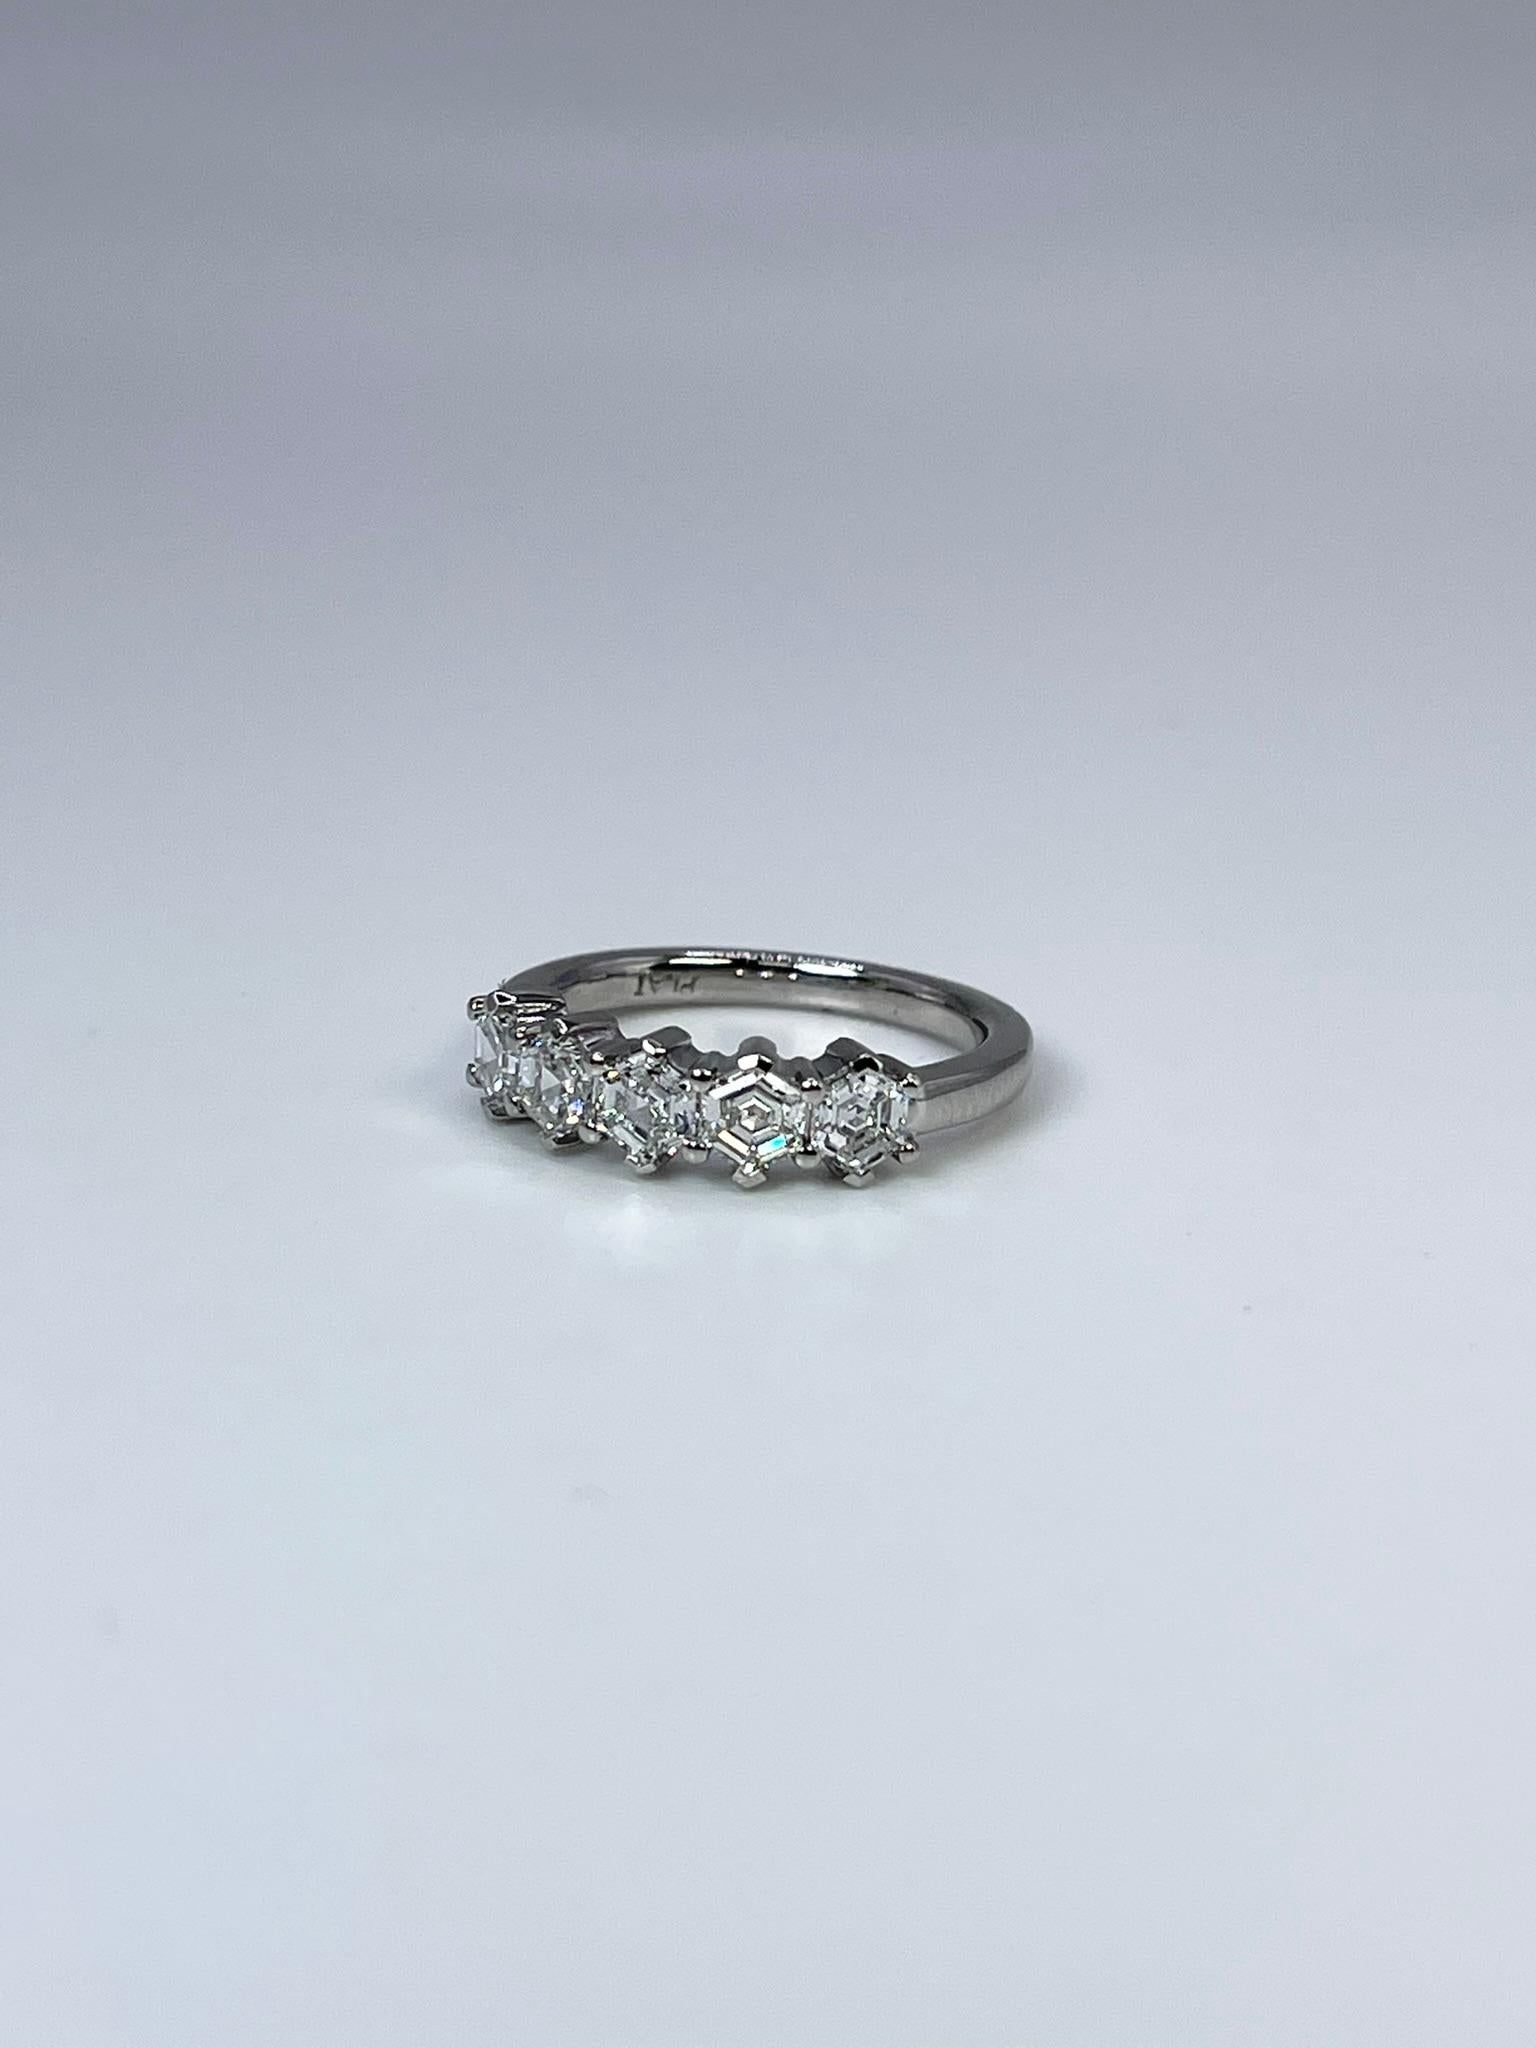 Diamond ring made in platinum with rare hexagon diamoands.

GRAM WEIGHT: 6.00gr
METAL: platinum

NATURAL DIAMOND(S)
Cut: hEXAGON
Color: F
Clarity: VS 
Carat: 1.24ct
Size: 6 ( can be re-sized)
Item number: 110-00026 KFFI


WHAT YOU GET AT STAMPAR